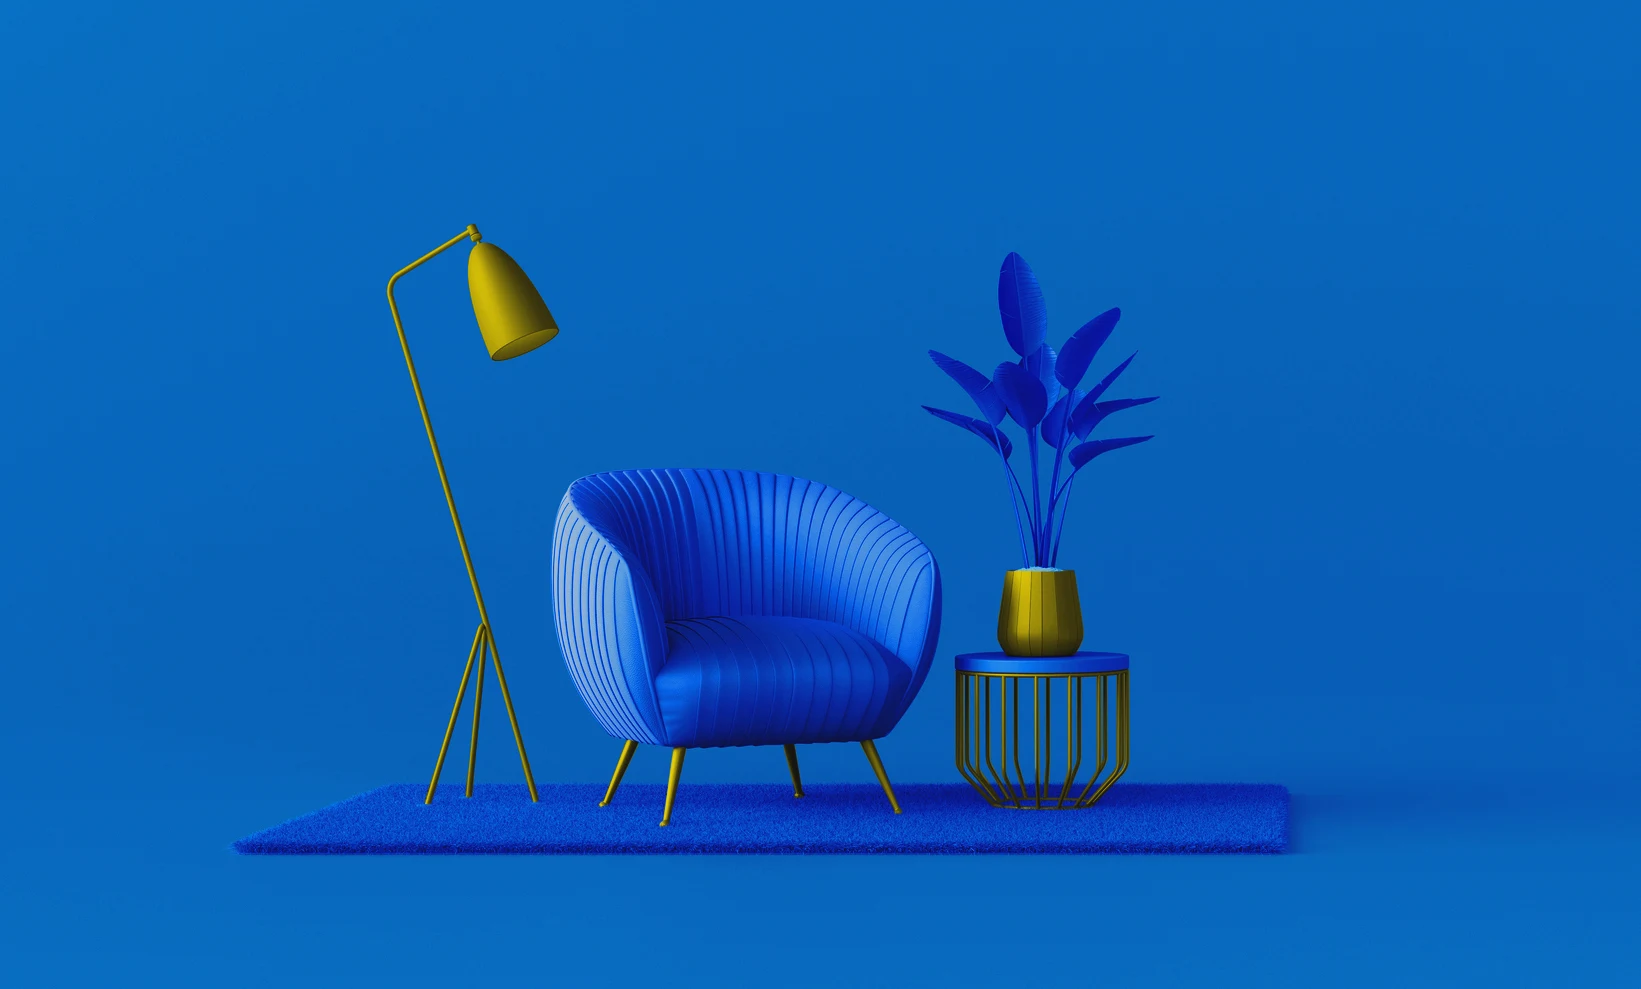 What can we learn from ikea branding?